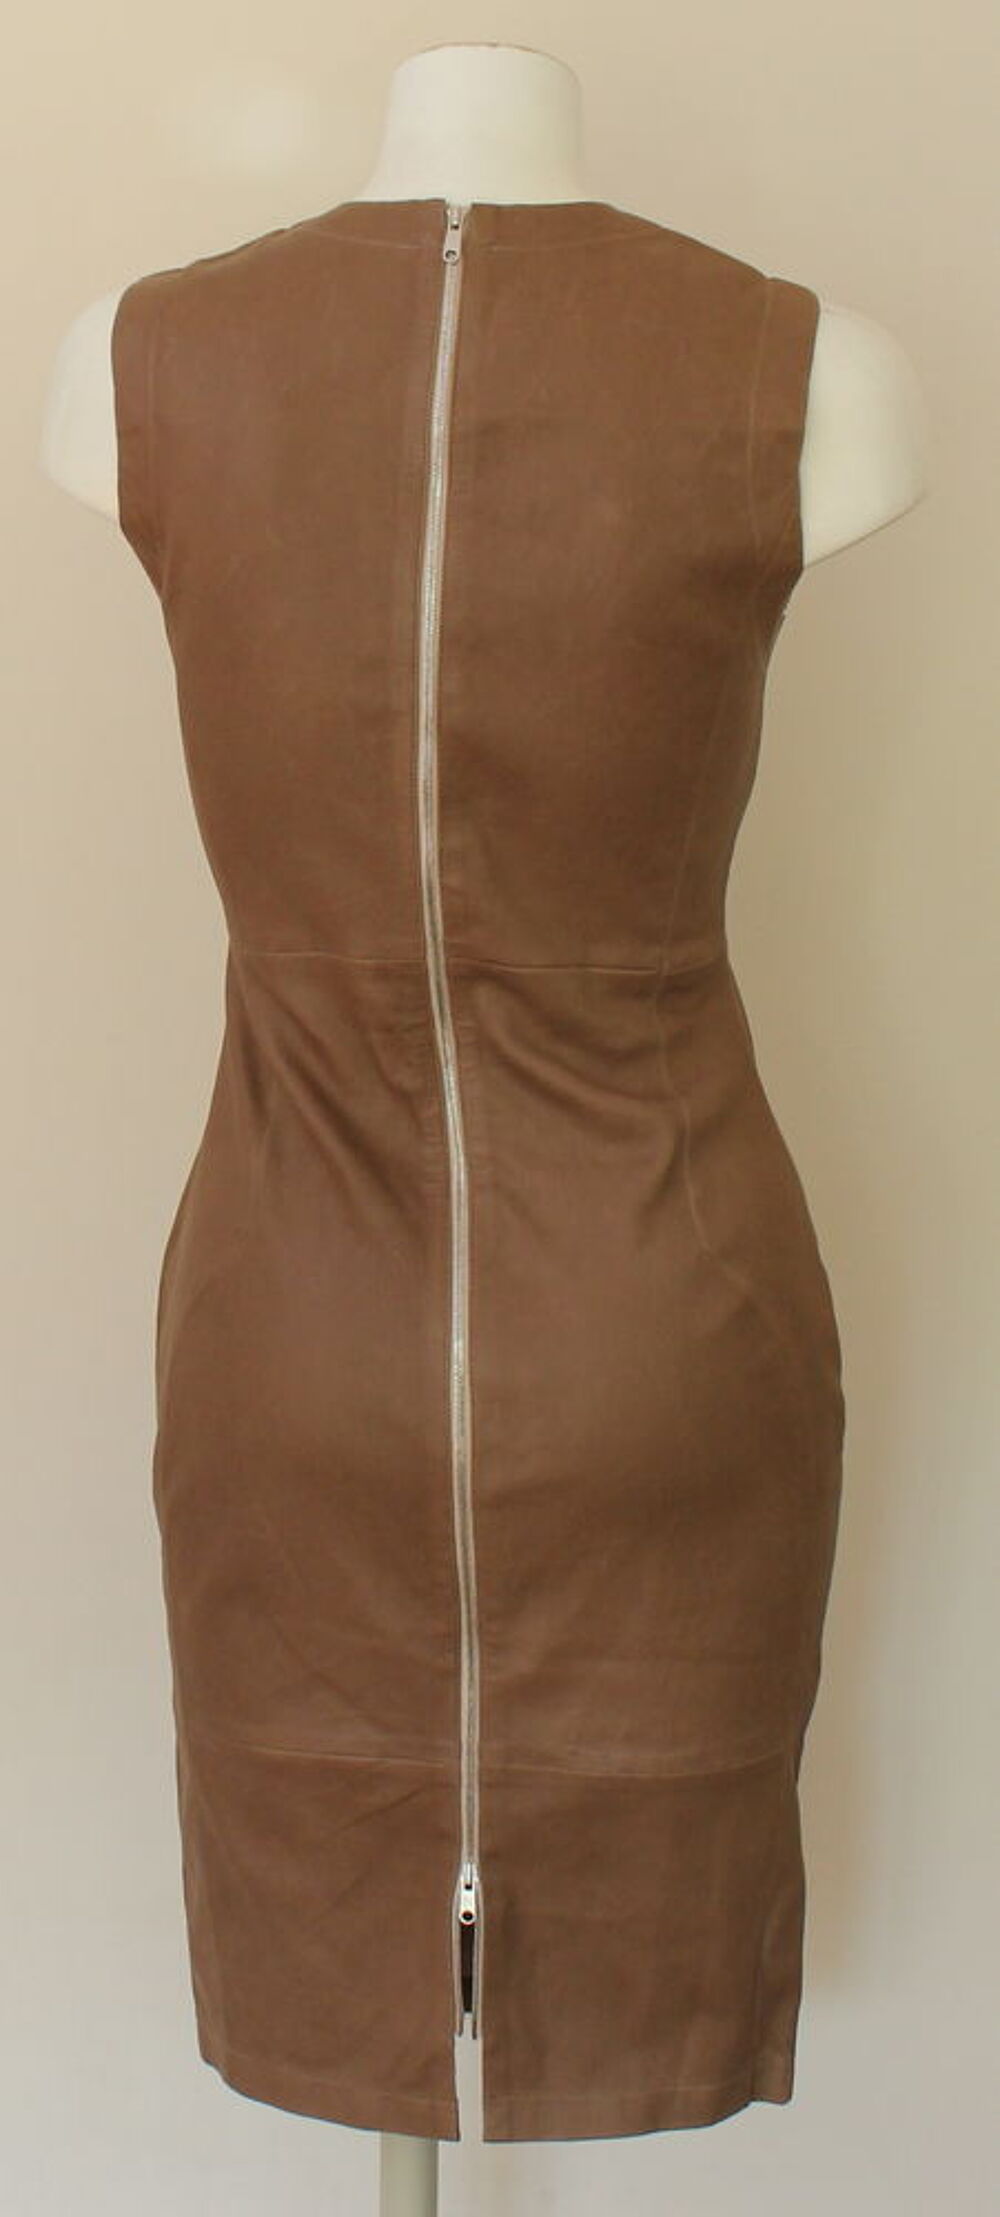 Robe cuir taupe VENT COUVERT T.36 Fr Vtements